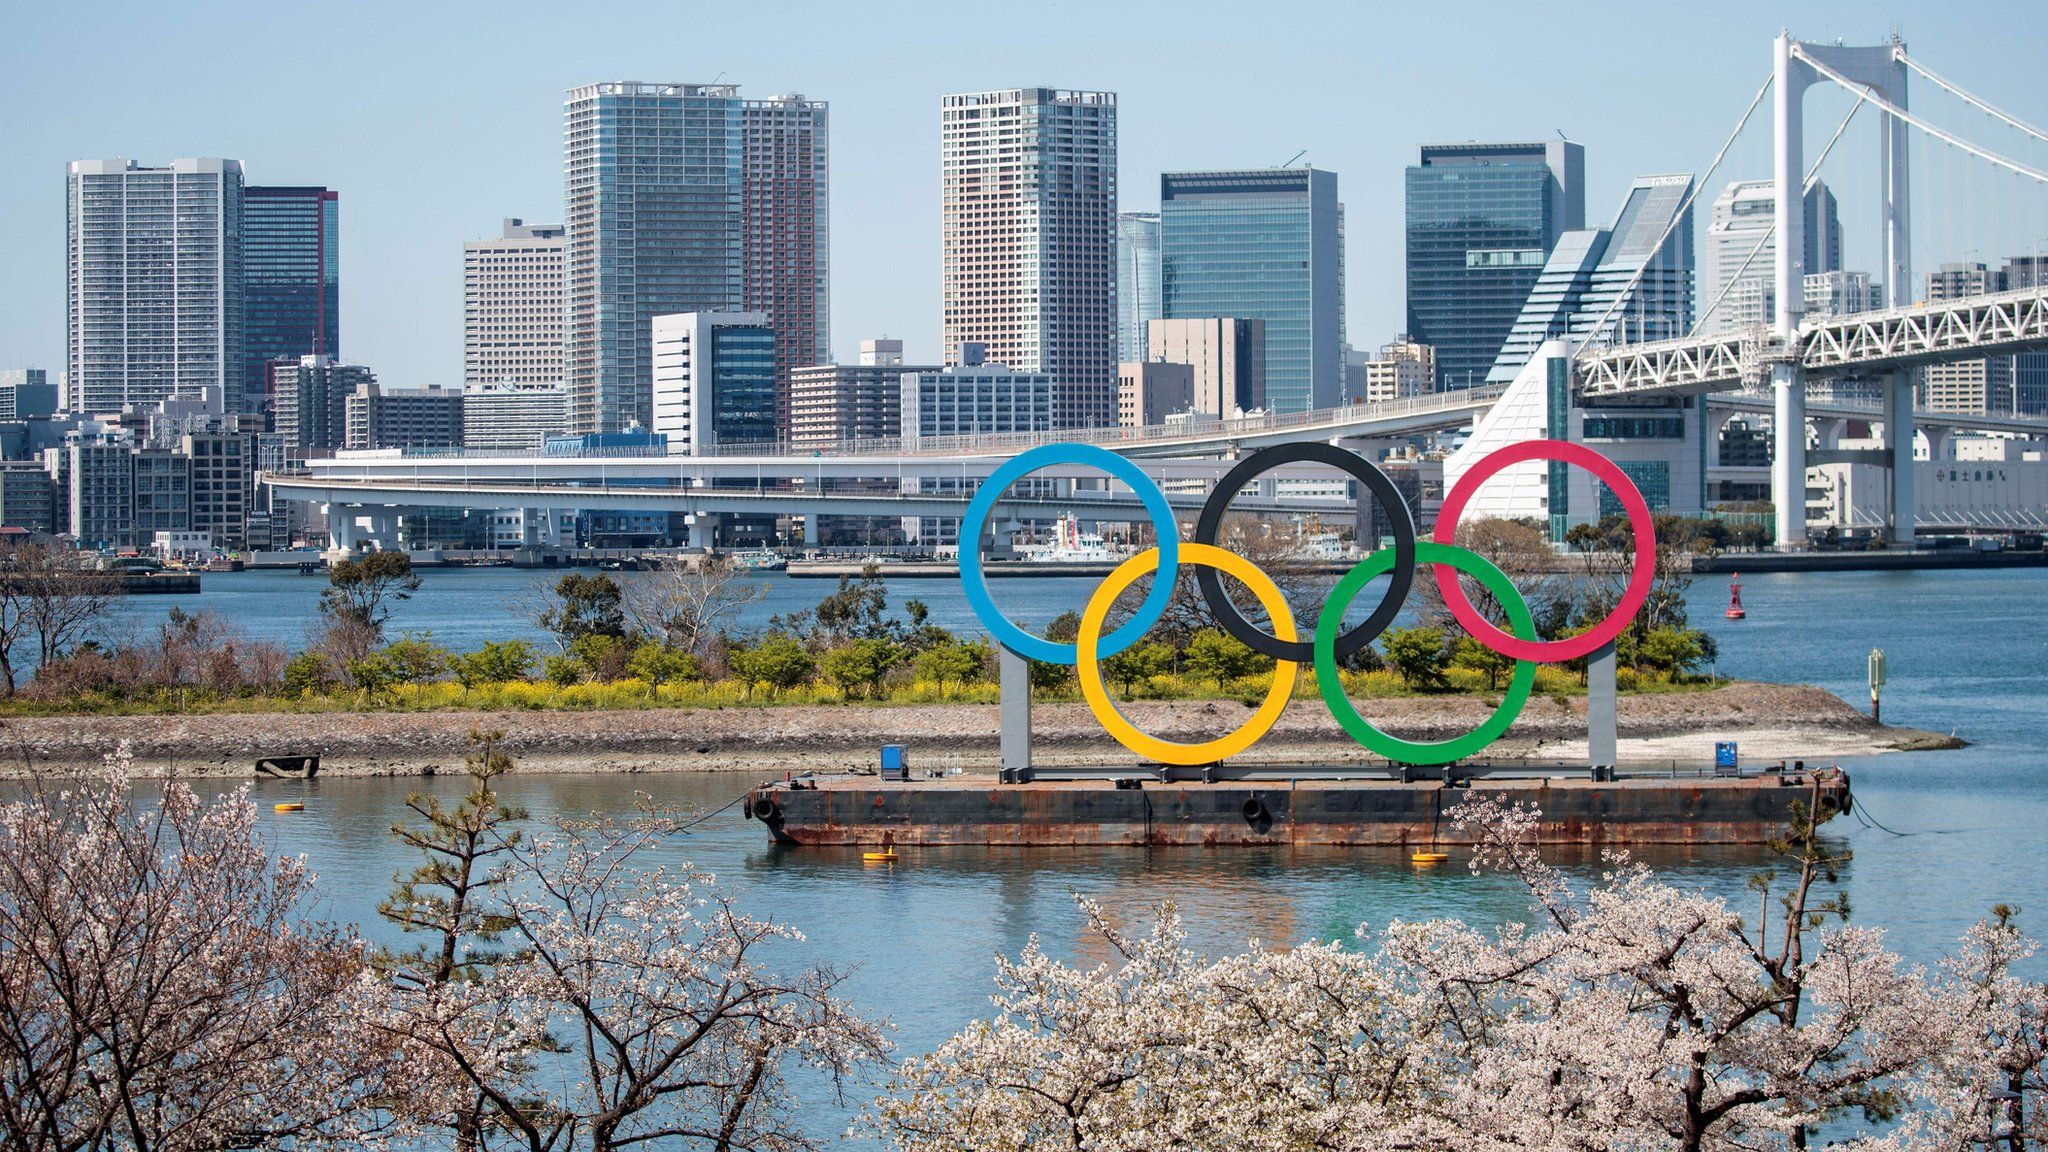 A general picture of the Tokyo skyline with the Olympic rings in the foreground